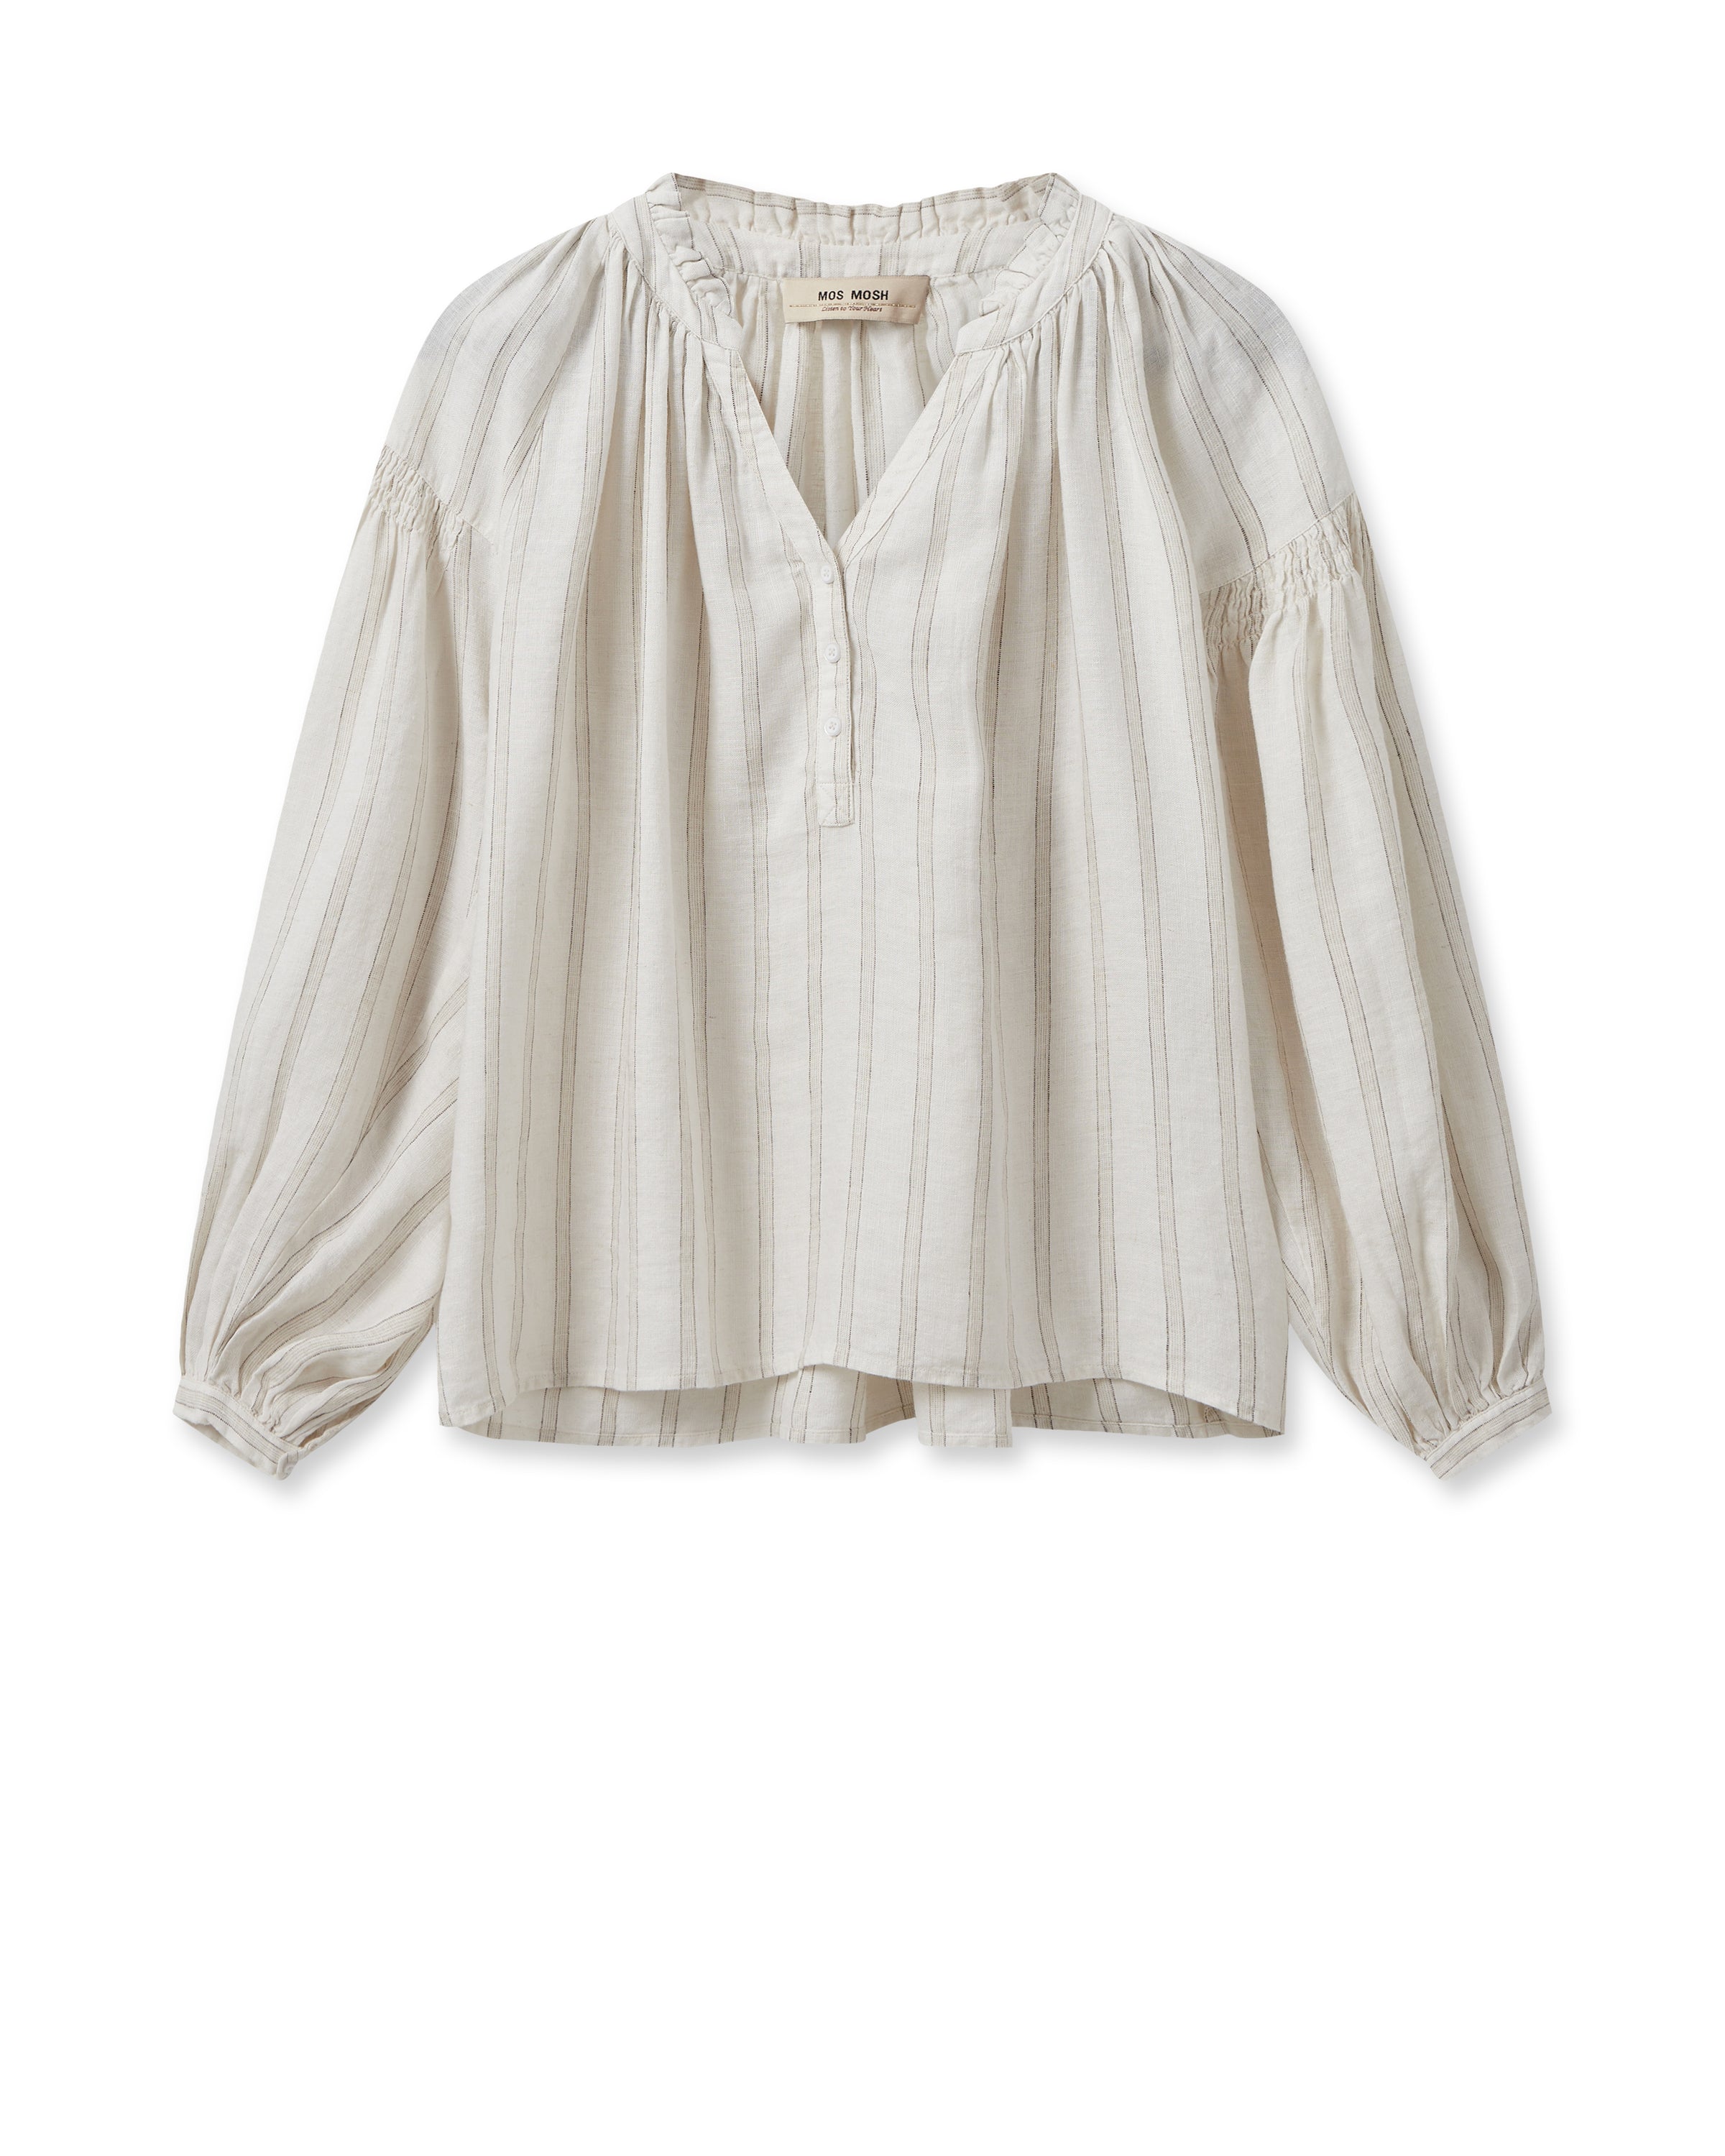 Loose fitting linen blend balloon sleeved shirt with a notch neck